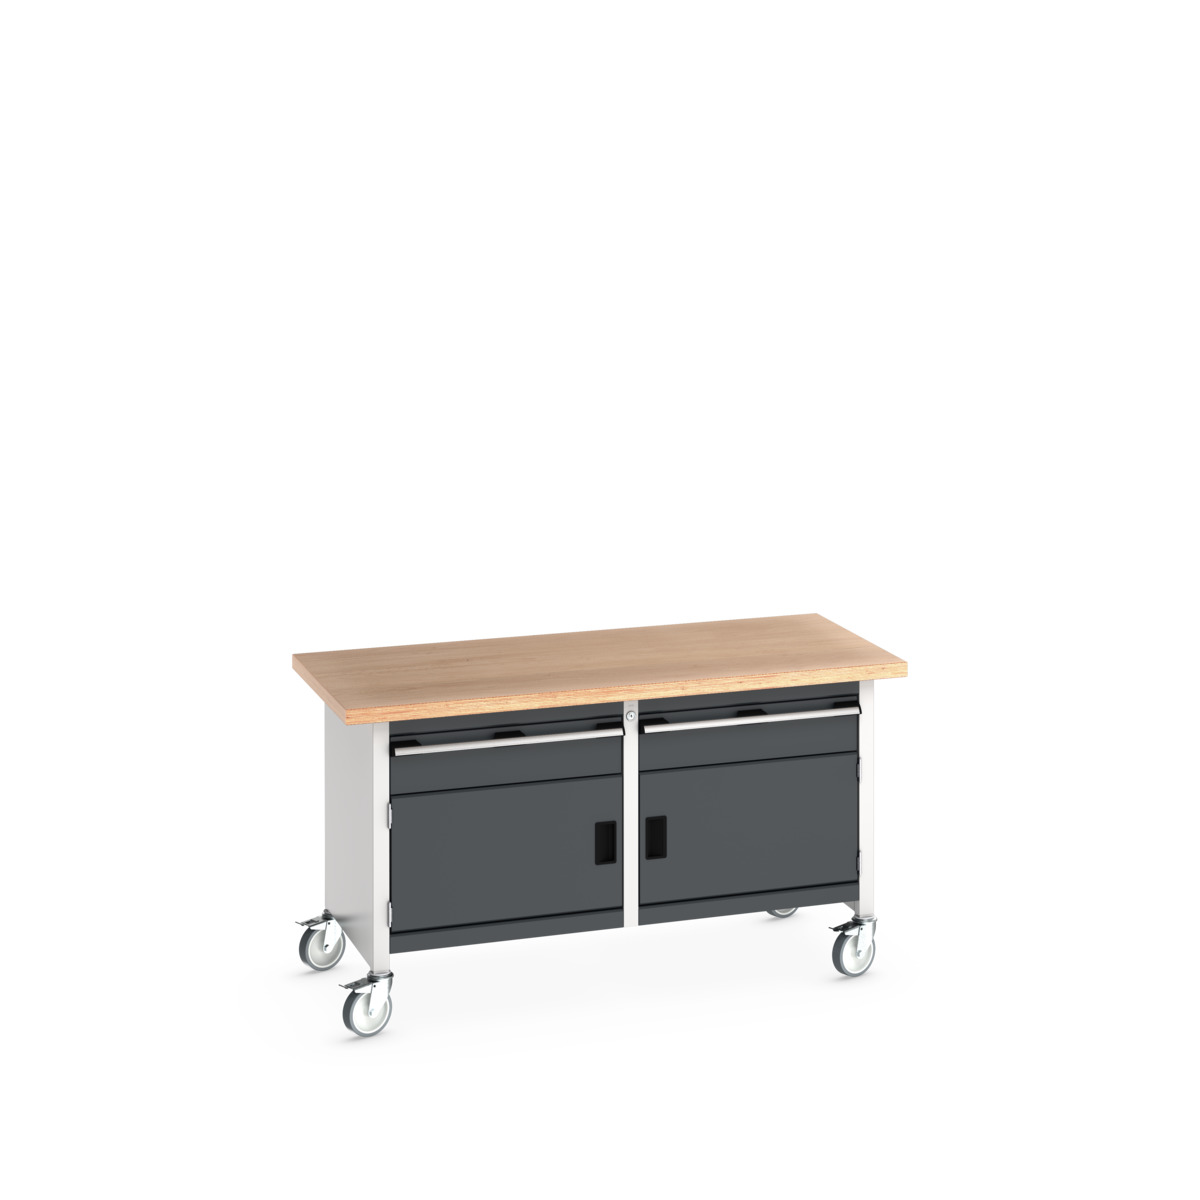 41002103.11V - cubio mobile storage bench (mpx)